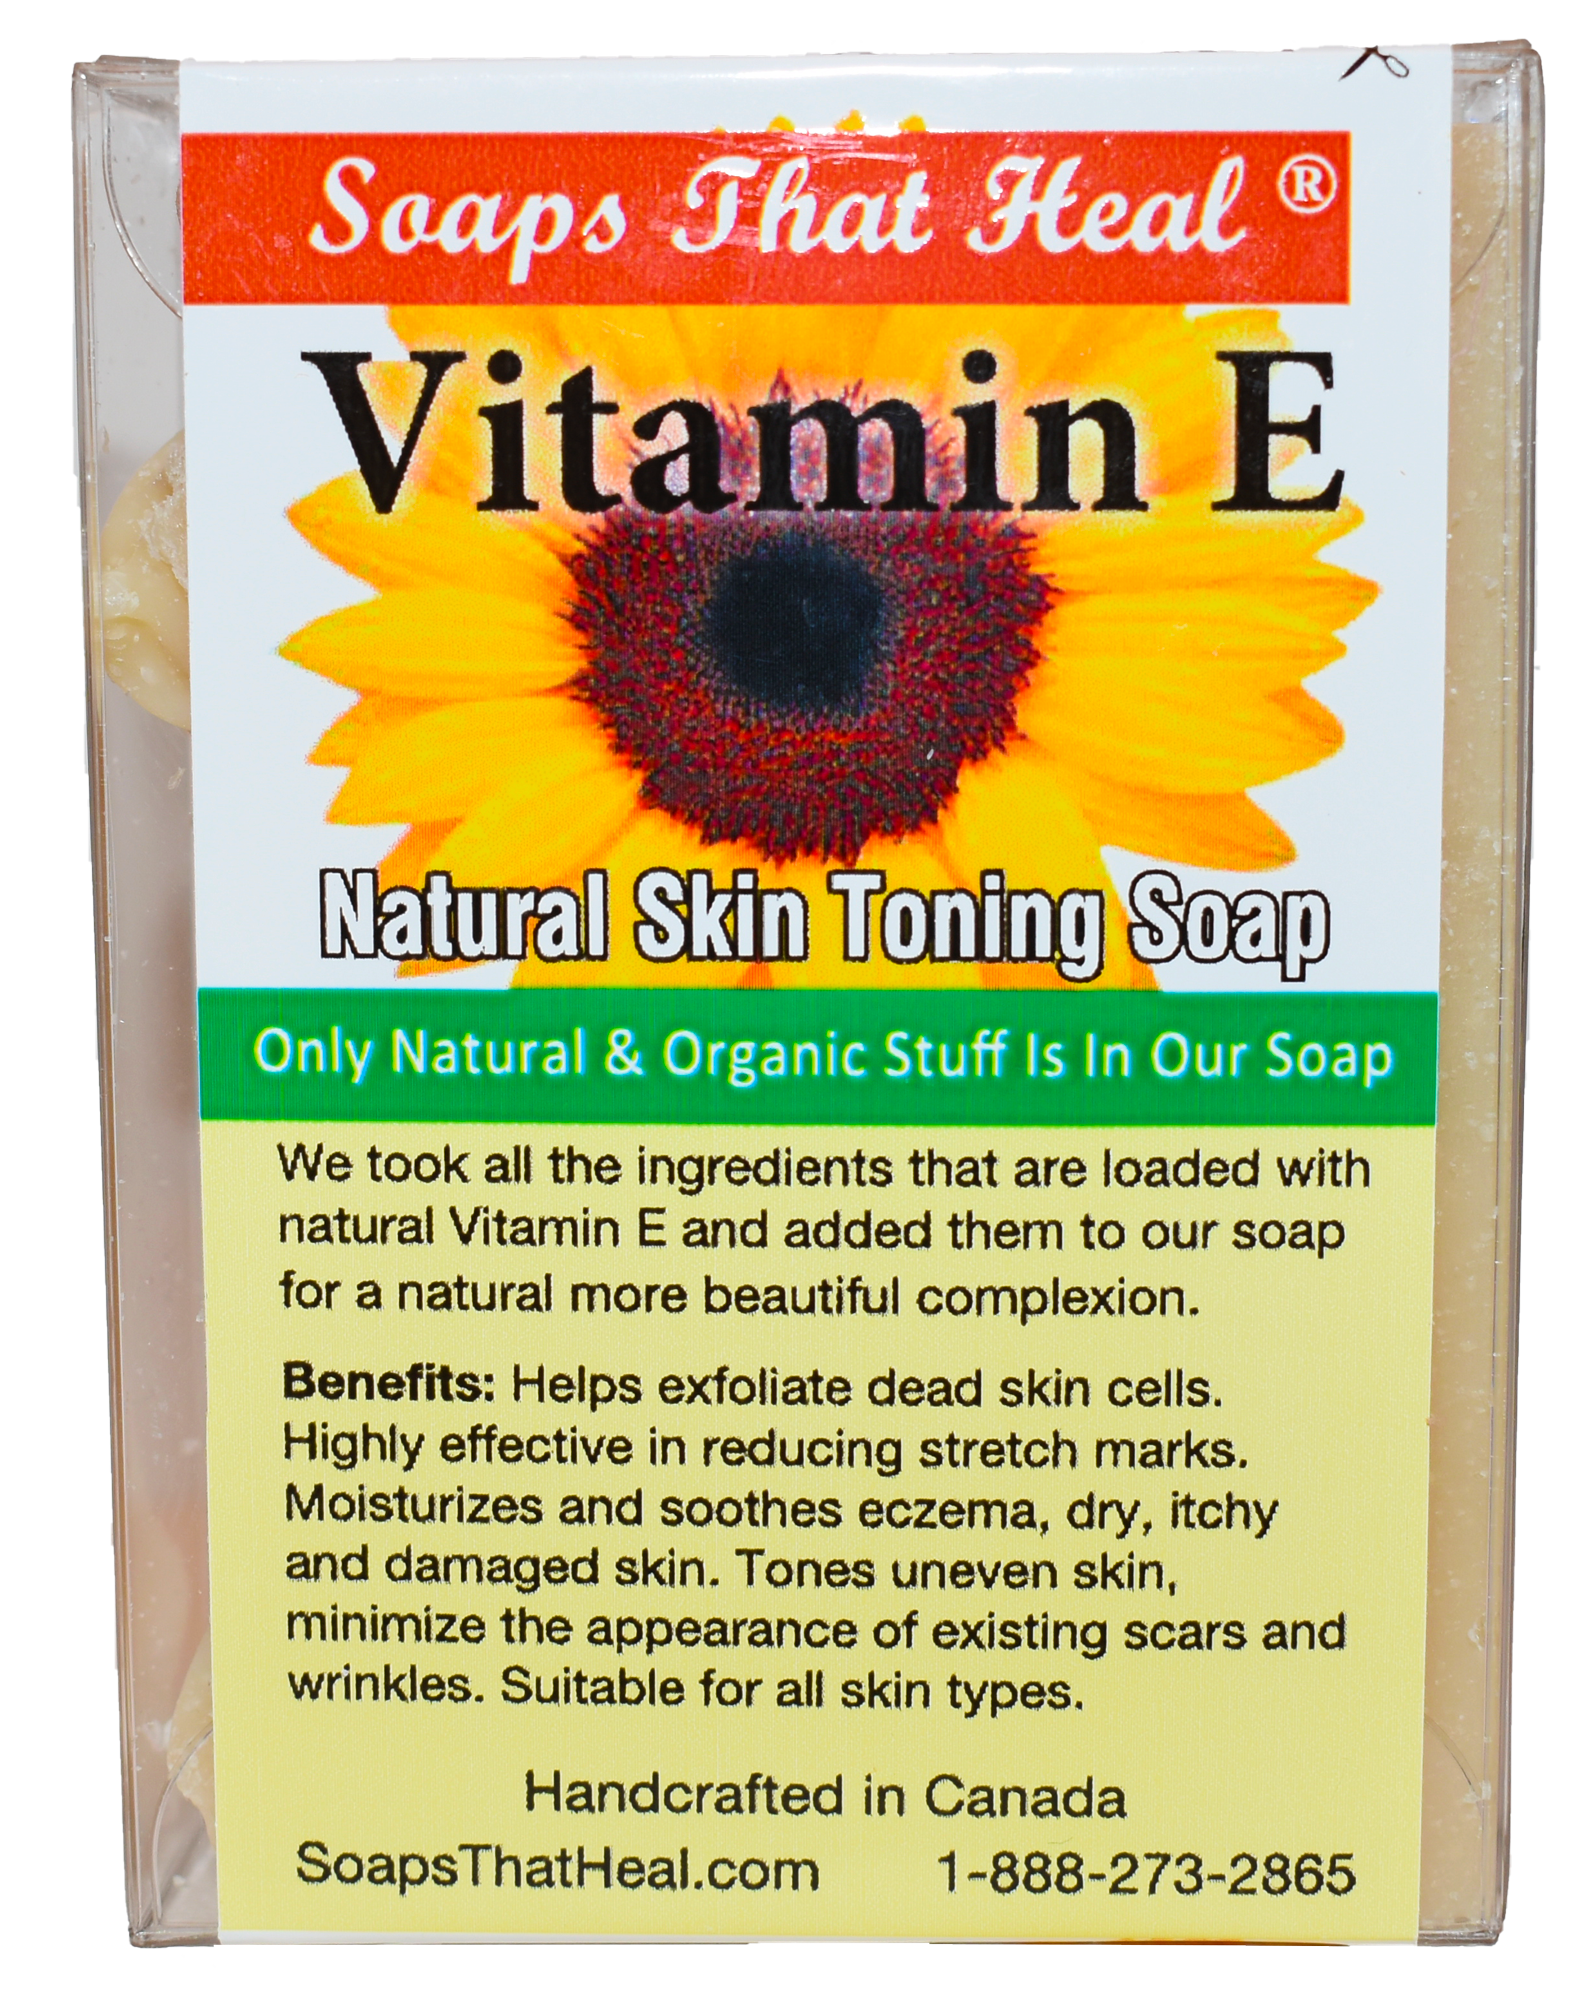 vitamin e soap,natural alternatives to whitening creams,fade creams,bleaching creams,Remove Dark Spots and Acne,aspen kay,Healthy Skin,natural skin care products,problem skin,the best body soap,saje,soaps that heal,healing soap, how to get rid of dark marks,dark spots,whitening soaps,lightening soaps,hyperpigmentation,vitamin e soap, toning, exfoliating,dead skin cells,pores